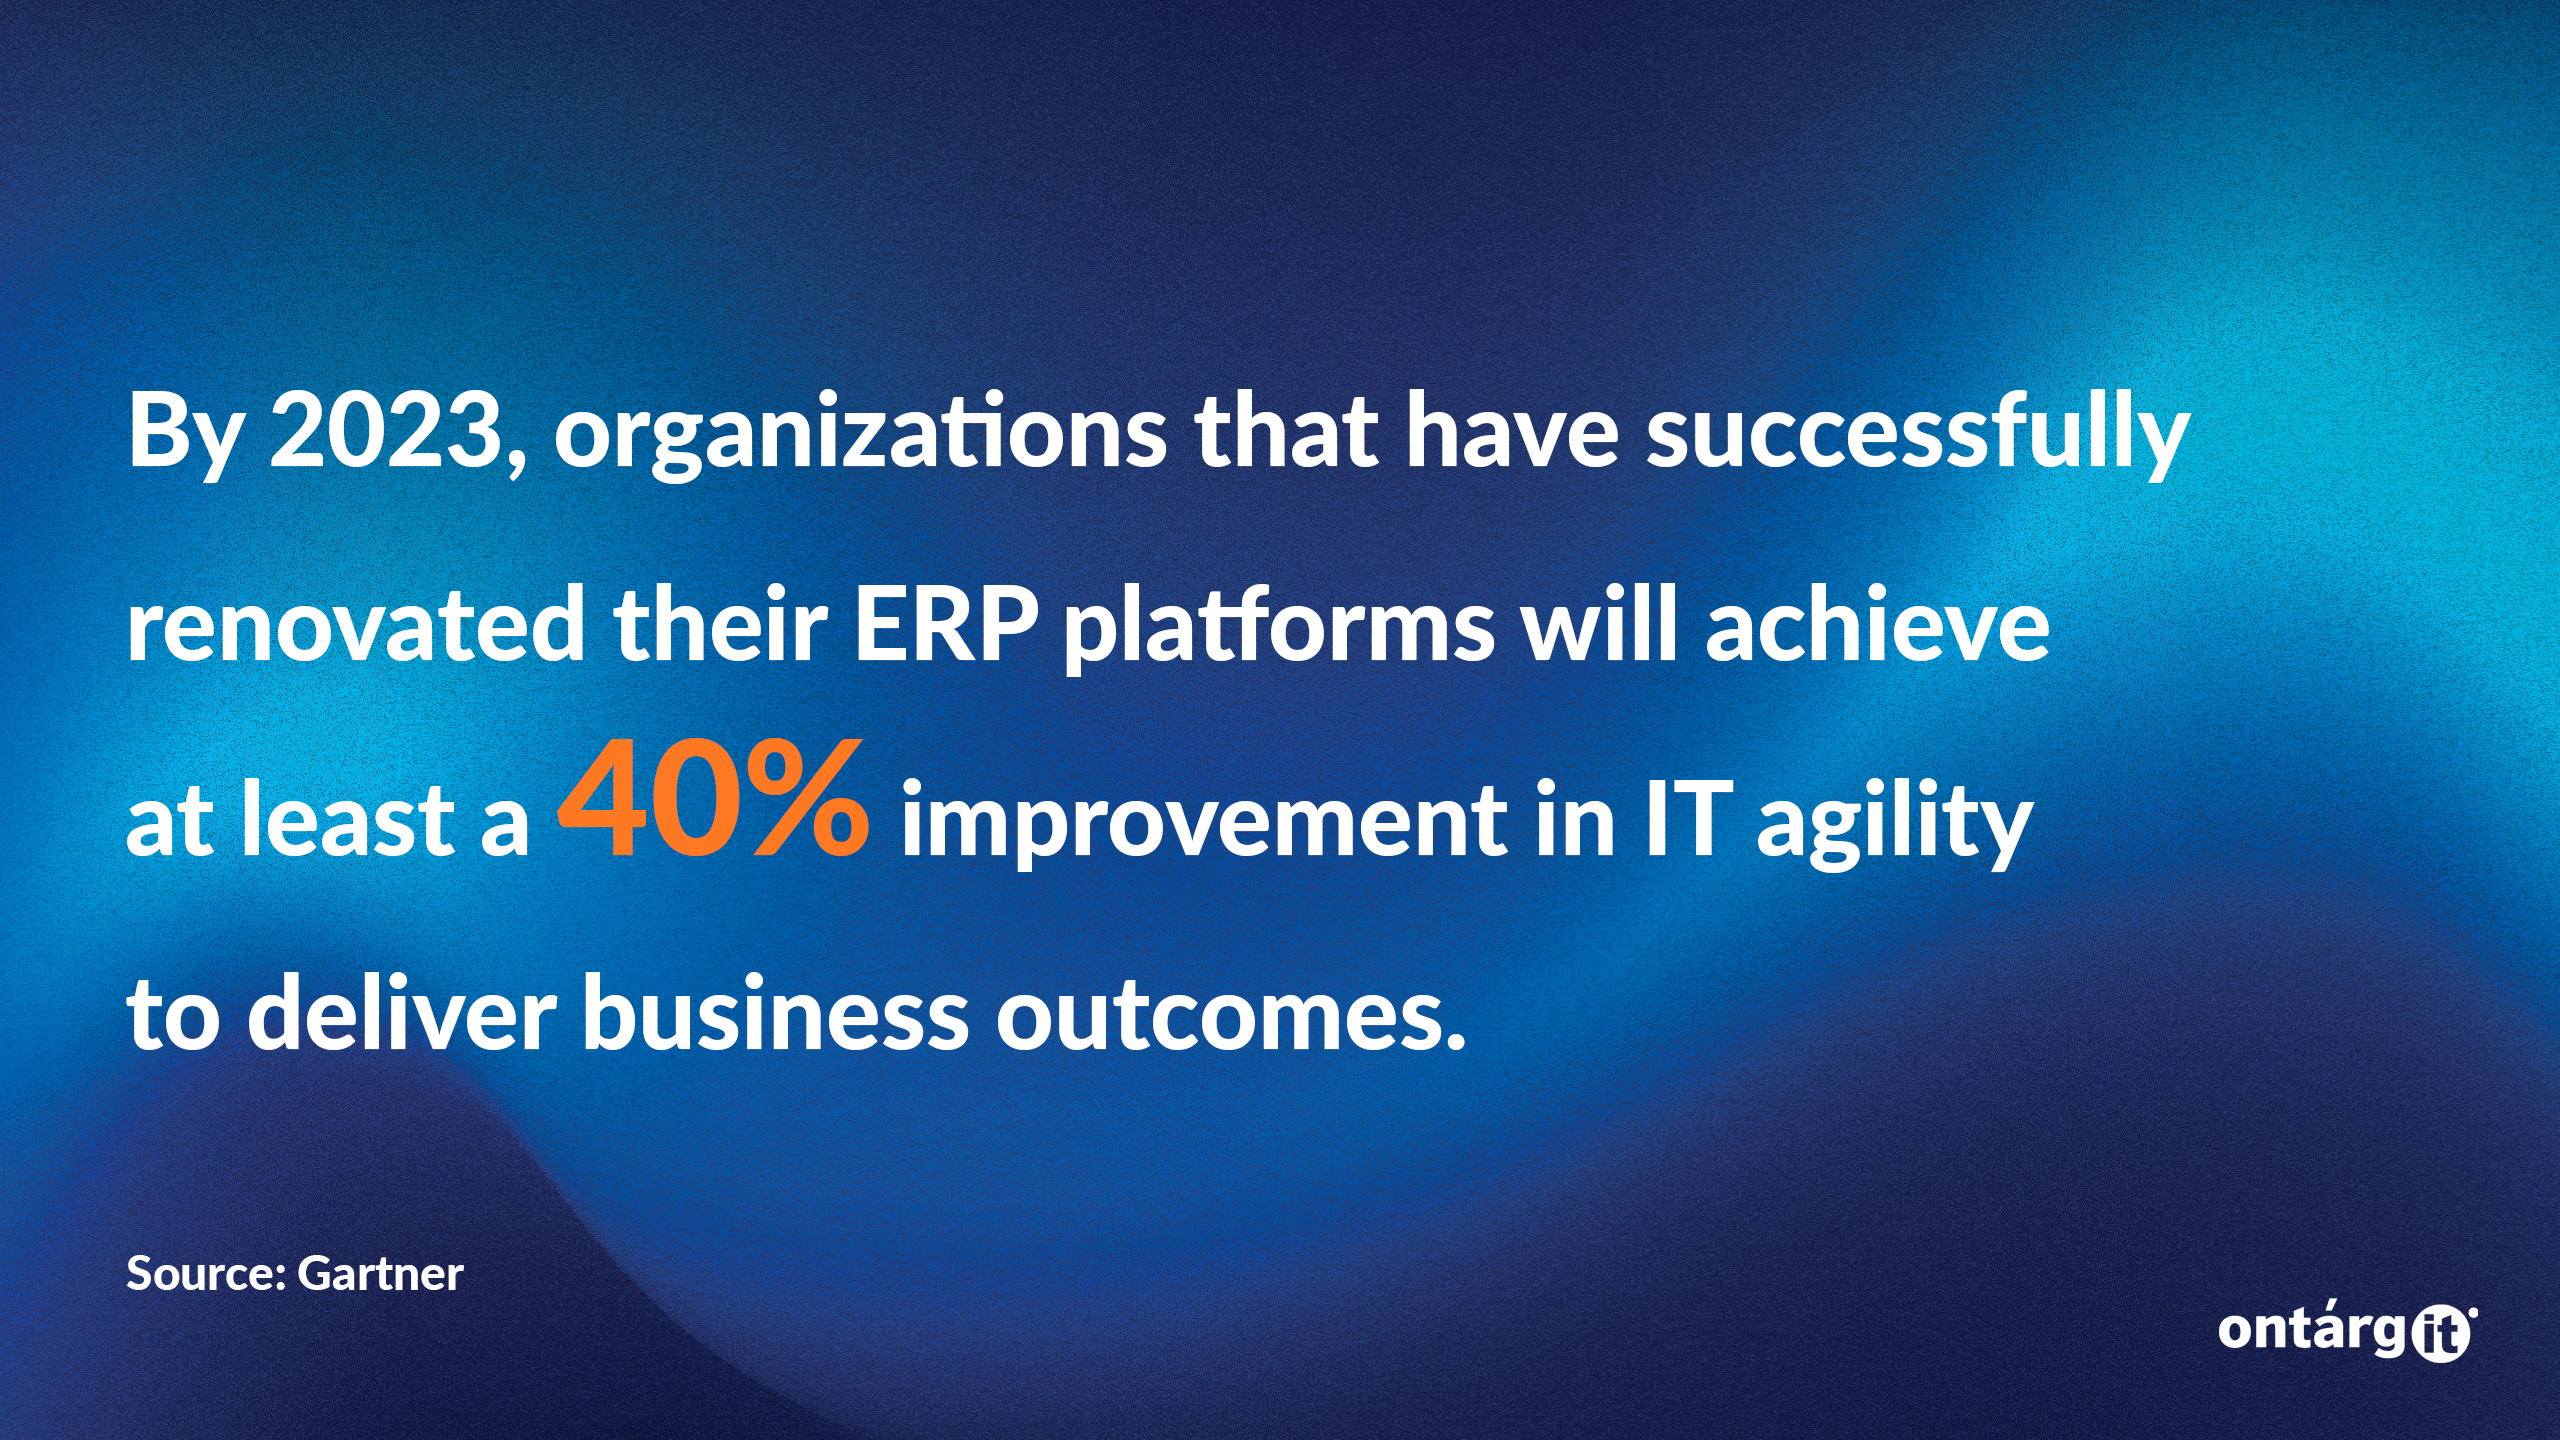 This is perhaps one reason that, according to Gartner®, by 2023, organizations that have successfully renovated their ERP platforms will achieve at least a 40 percent improvement in IT agility to deliver business outcomes.